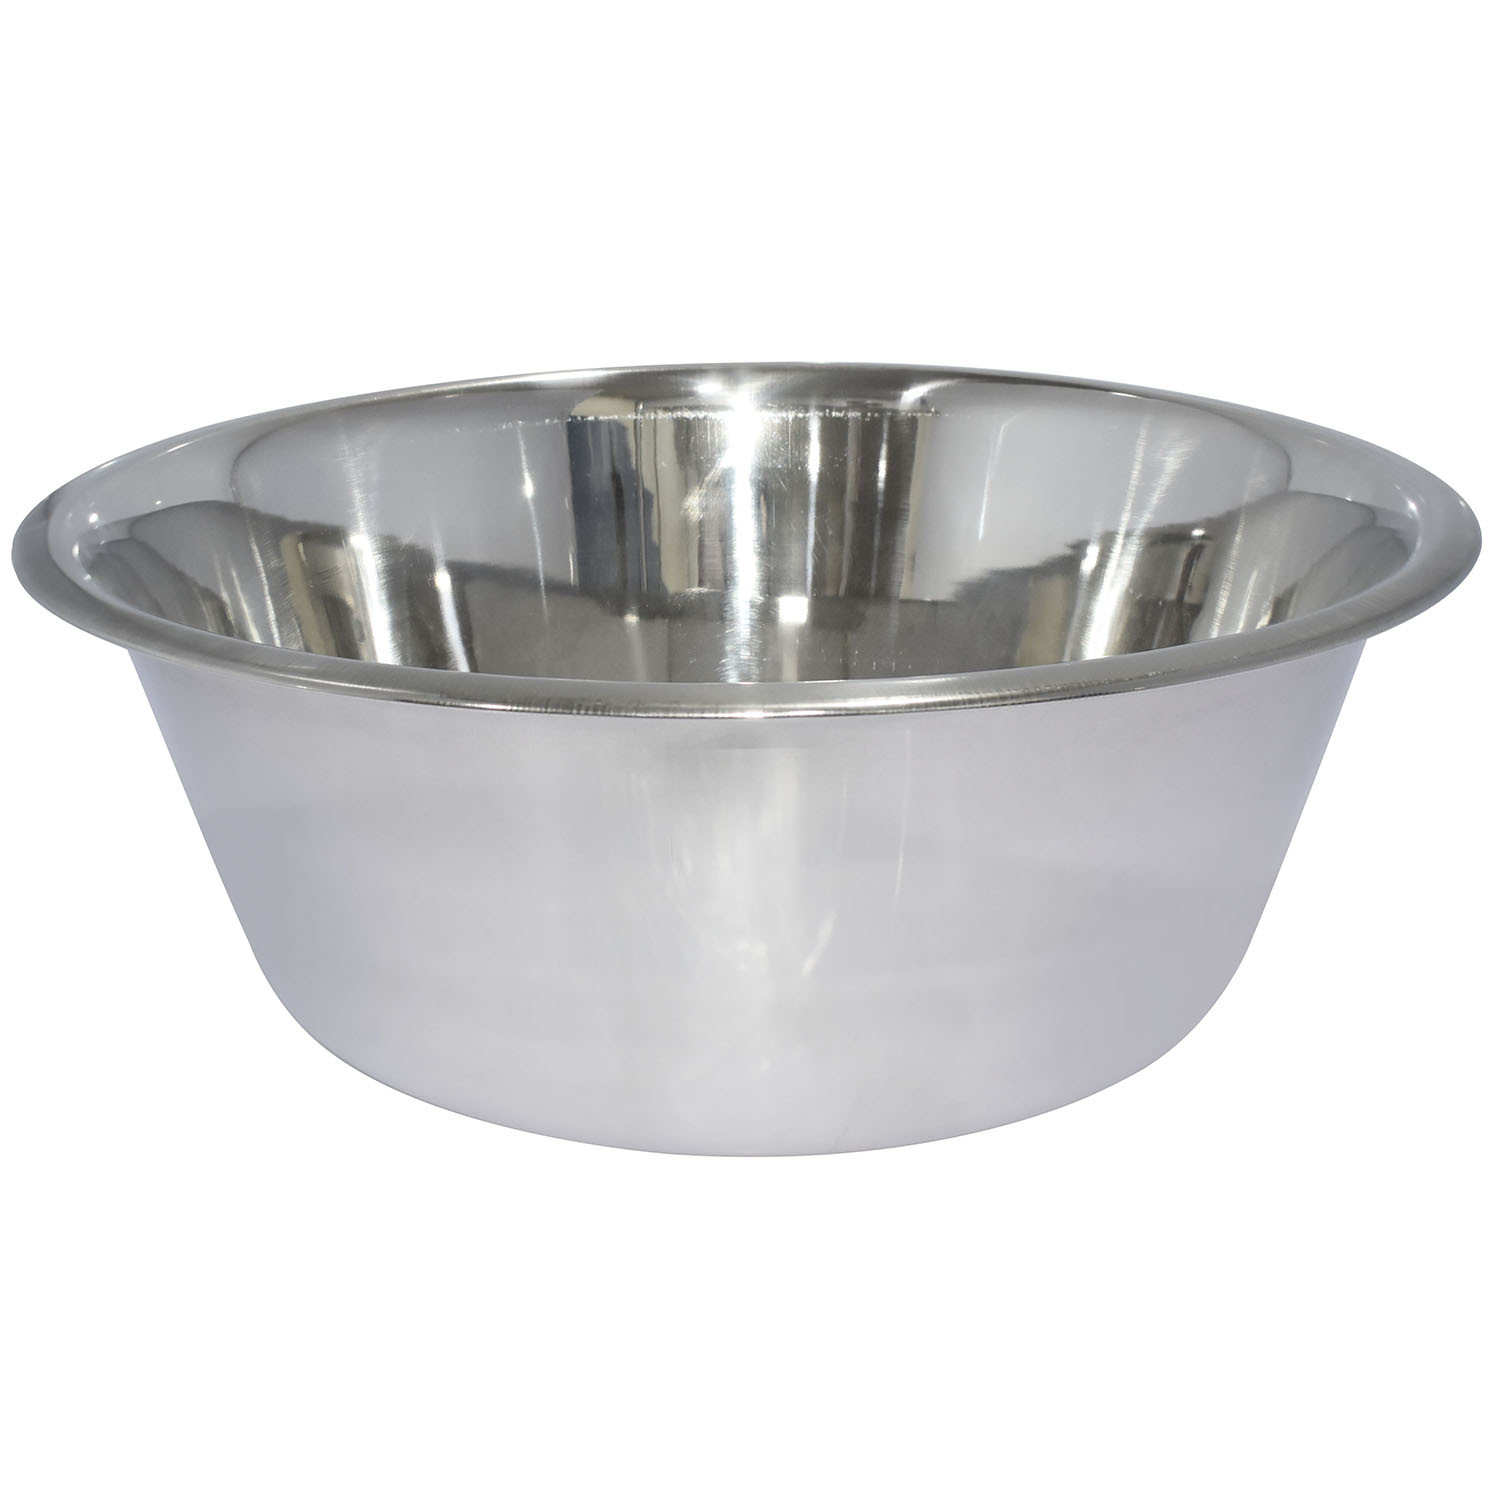 Clever Paws Small Stainless Steel Pet Bowl Image